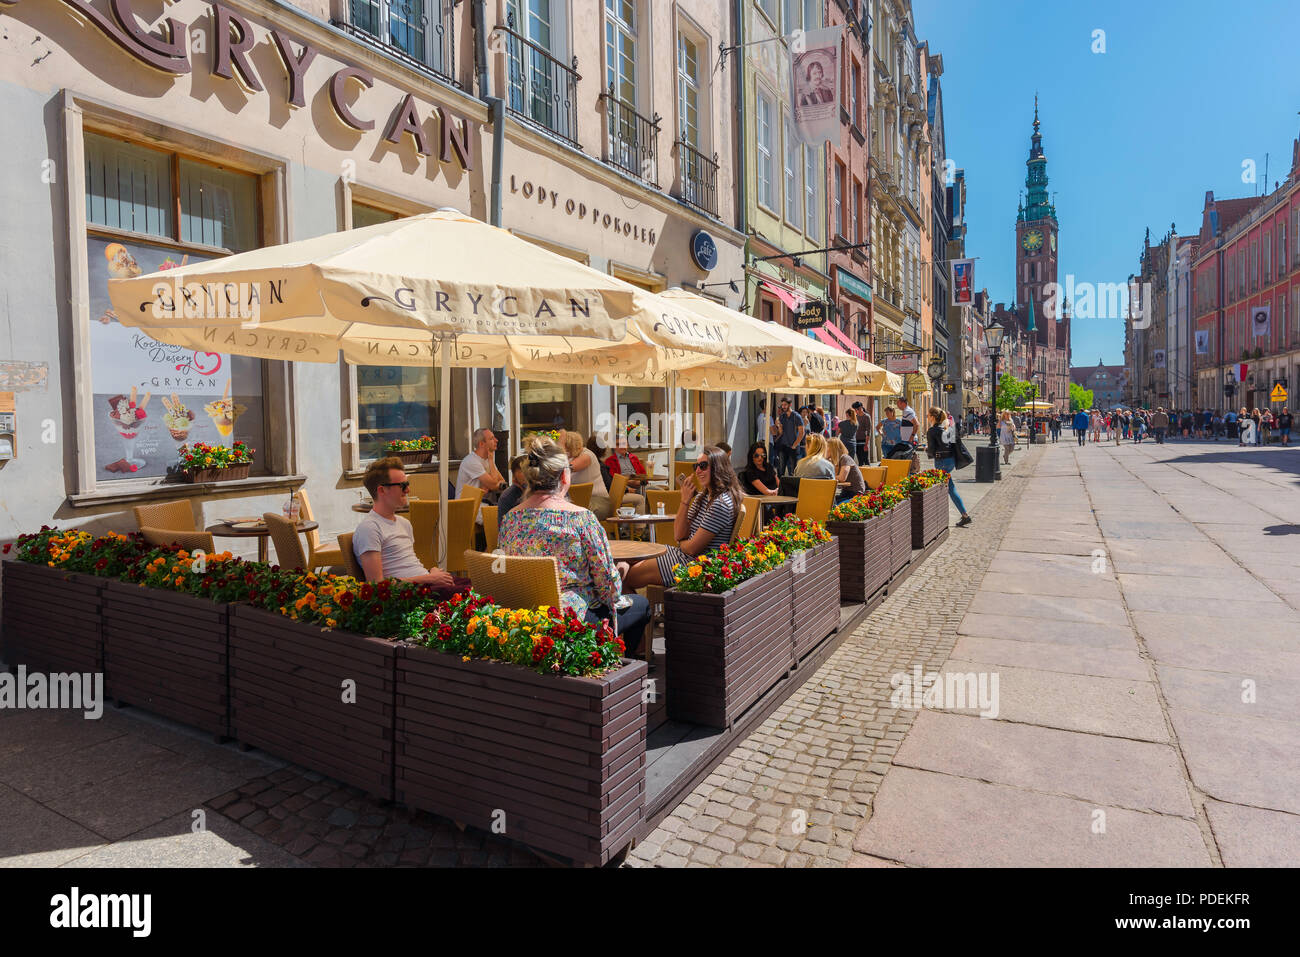 Gdansk cafe, view of people relaxing outside a cafe in Dlugi Targ (Long Market), the main thoroughfare in the Old Town quarter of Gdansk, Poland. Stock Photo